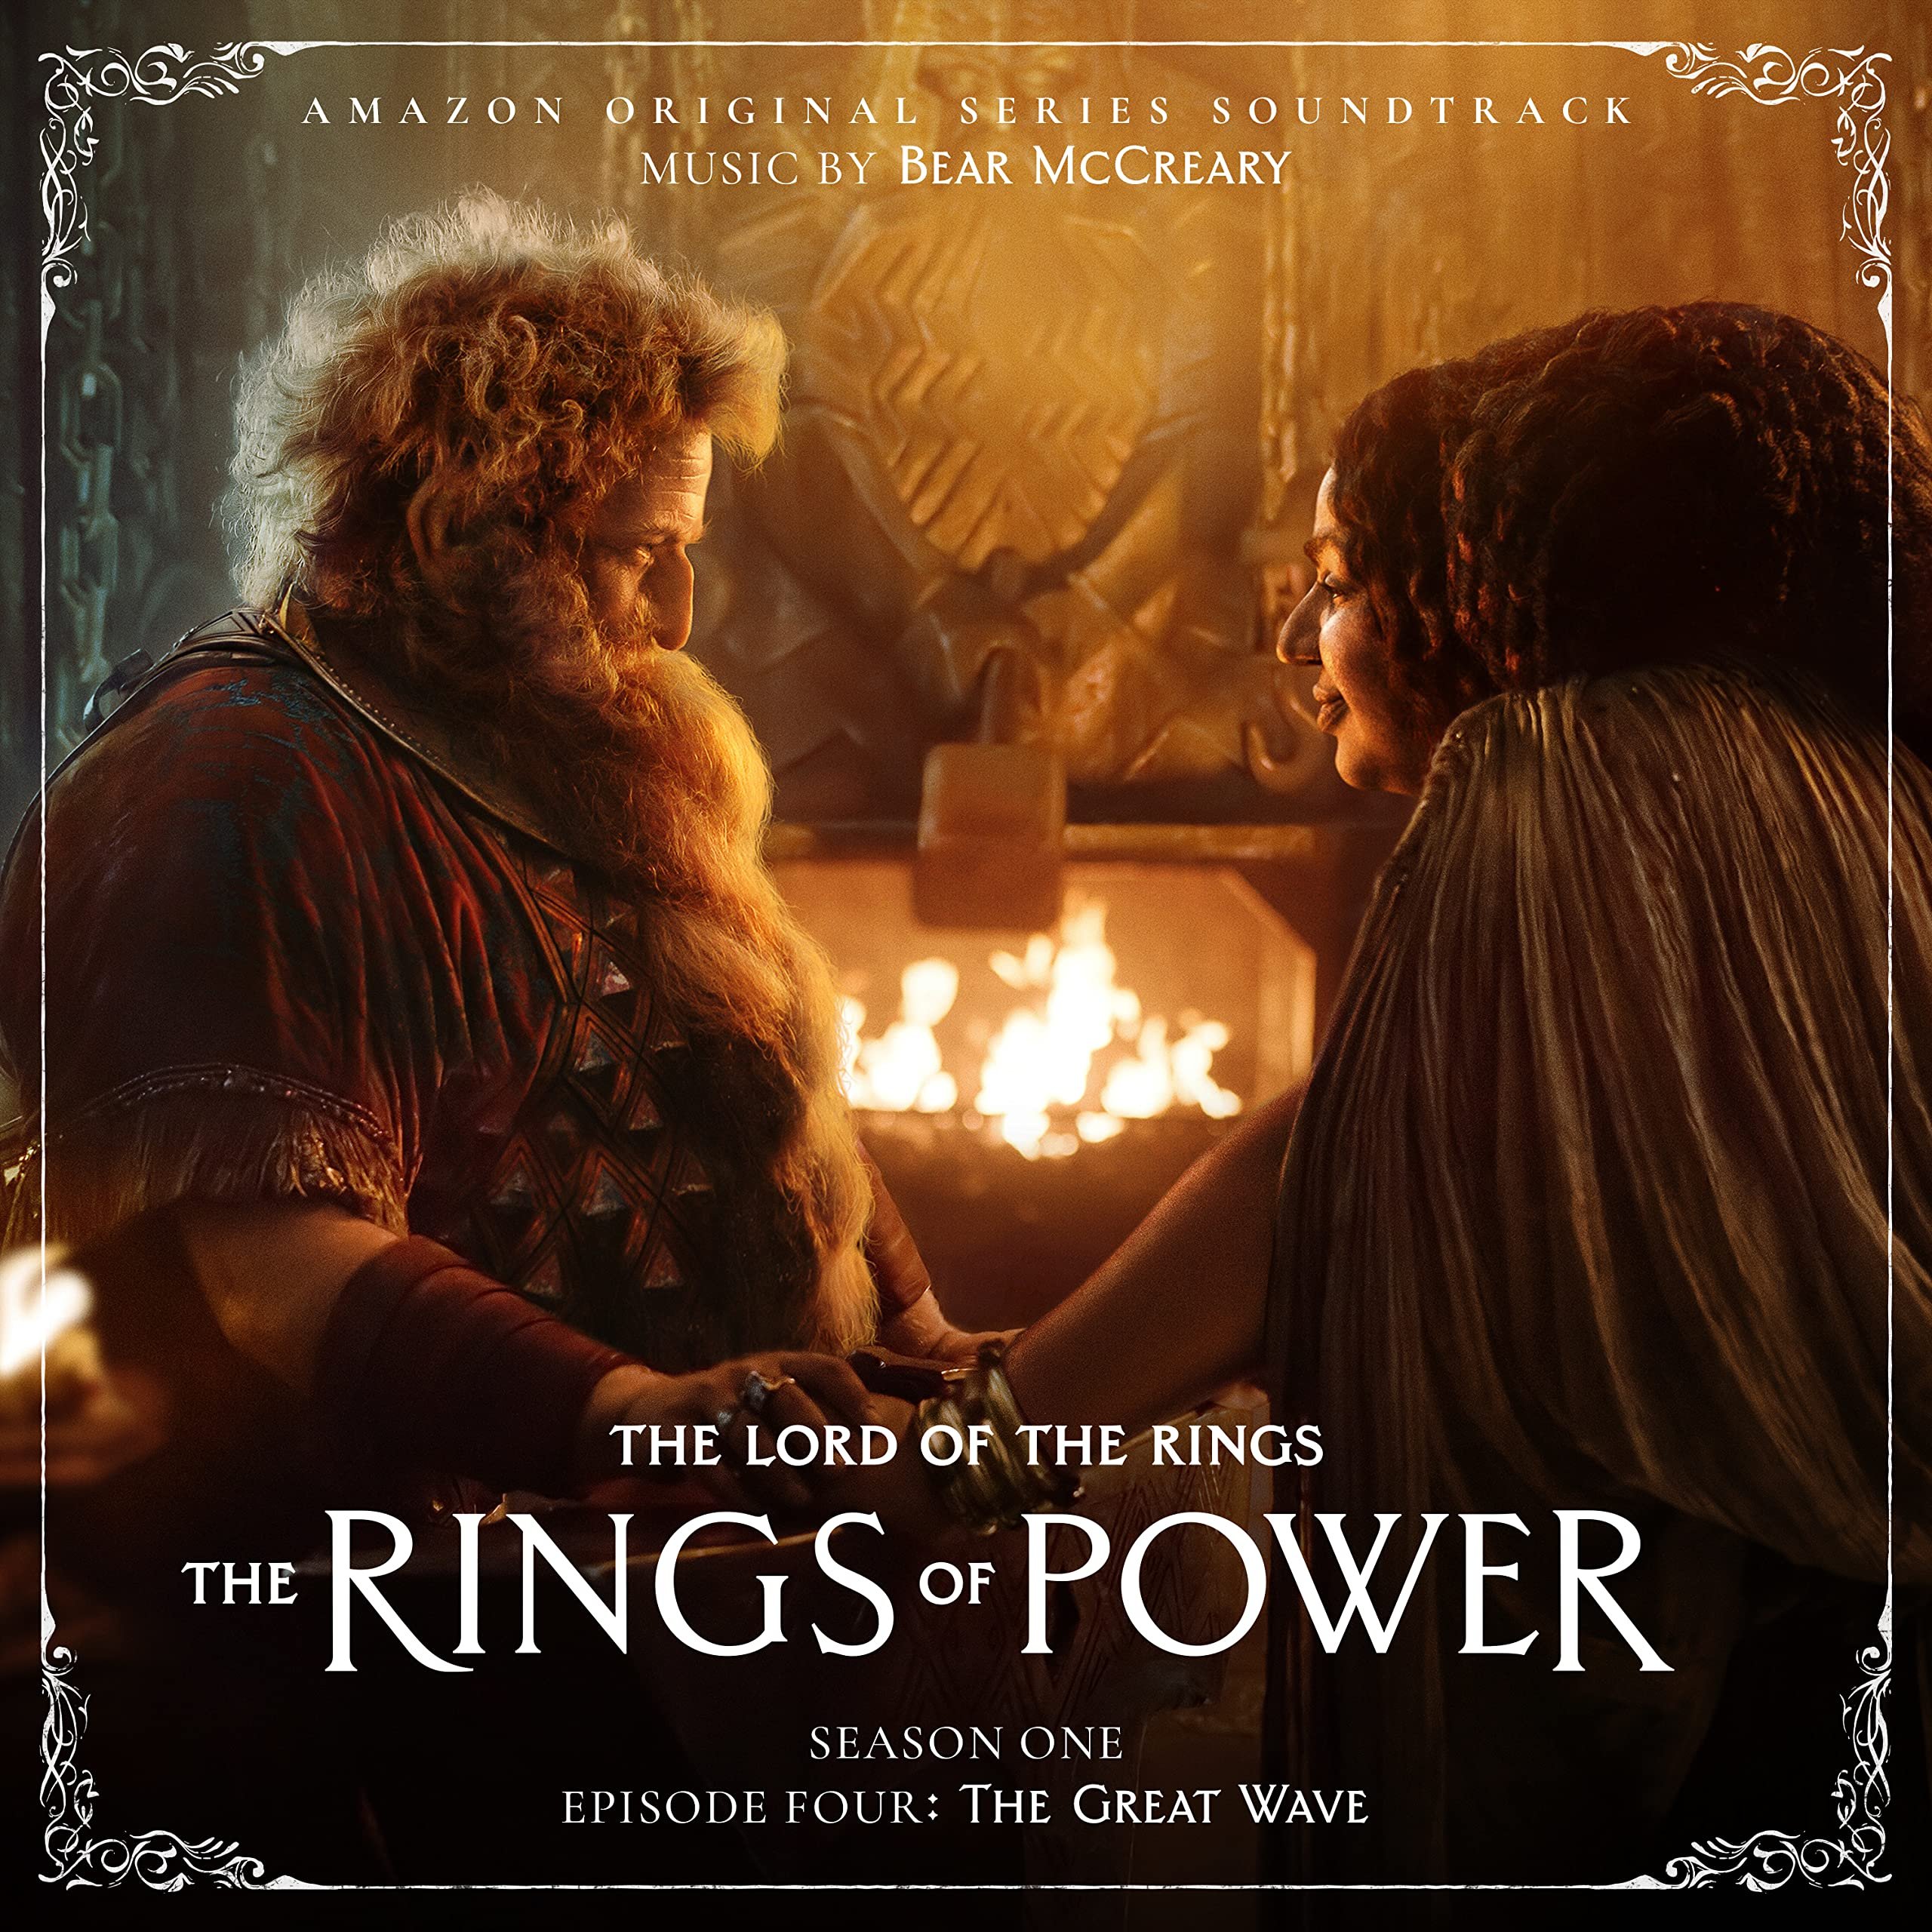 The Lord of the Rings: The Rings of Power (Season One, Episode Four: The  Great Wave - Amazon Original Series Soundtrack) — Bear McCreary | Last.fm